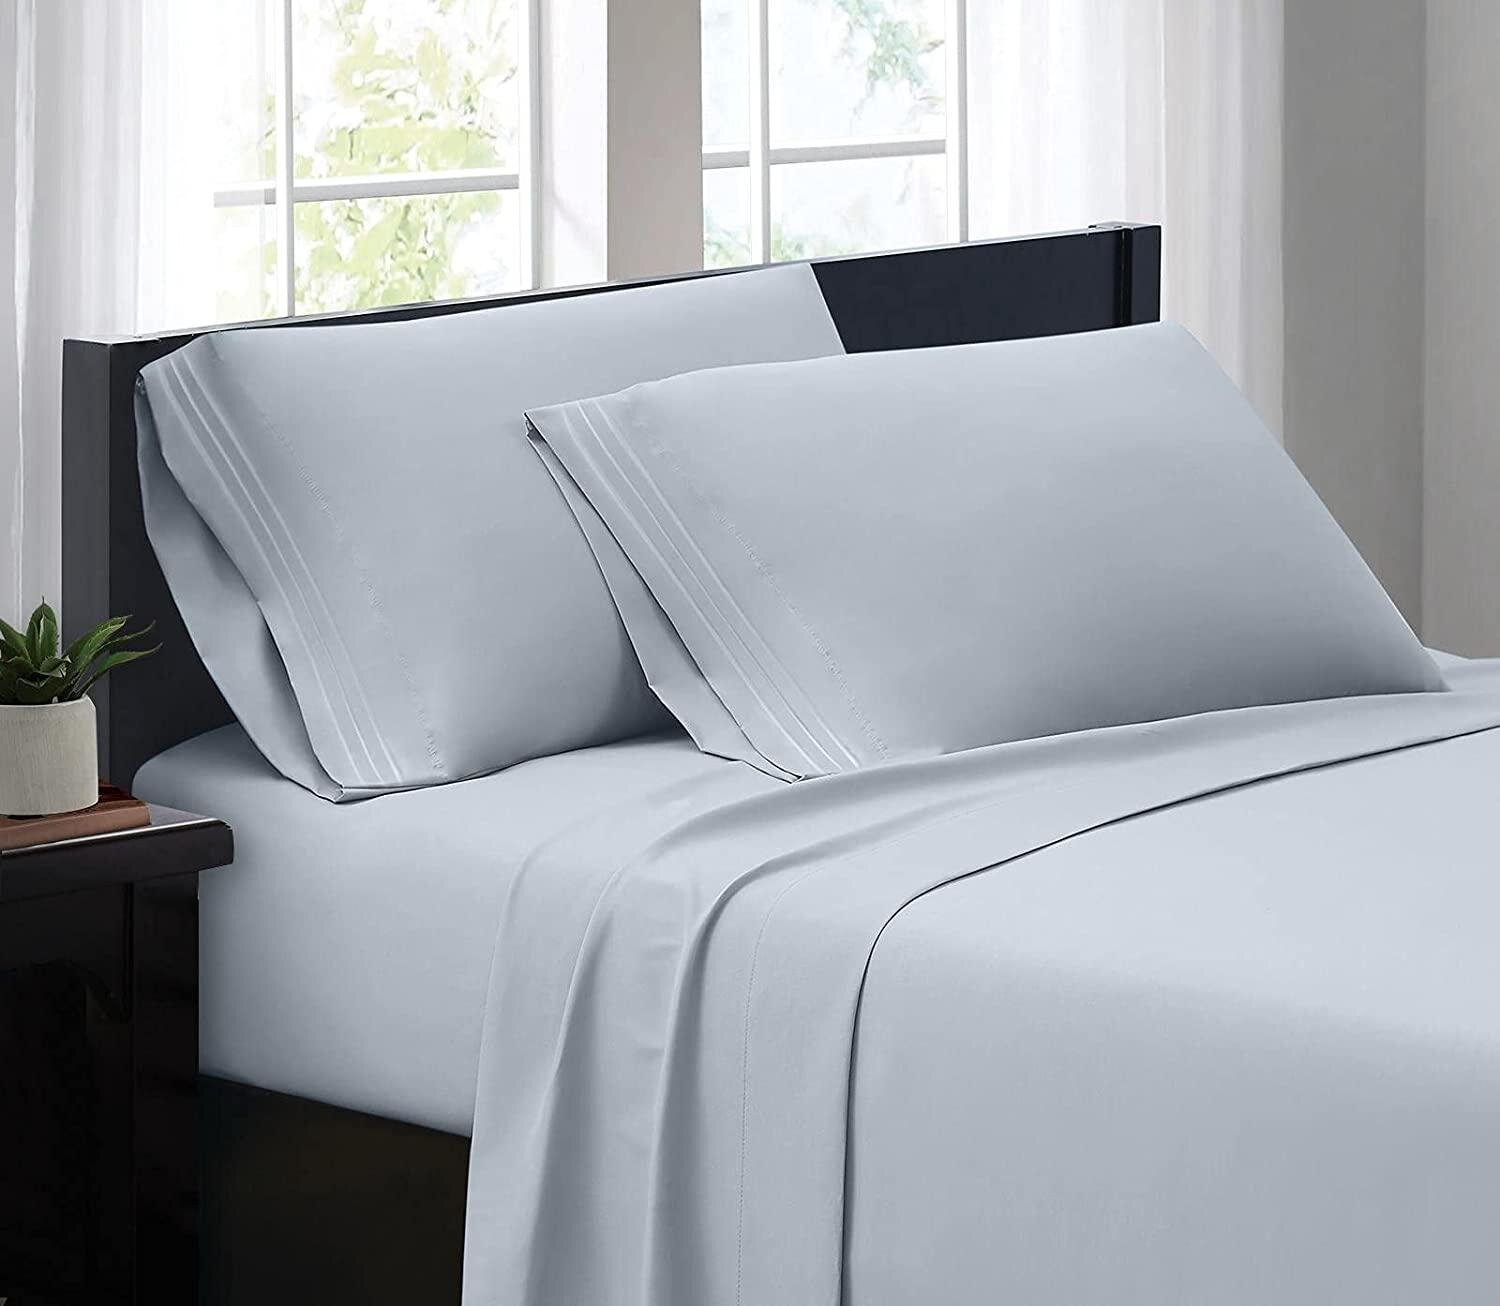 King Size 6-Piece Bed Sheets Set Microfiber 1800 Thread Count Percale 16 Inch Deep Pockets Super Soft and Comforterble King,White 